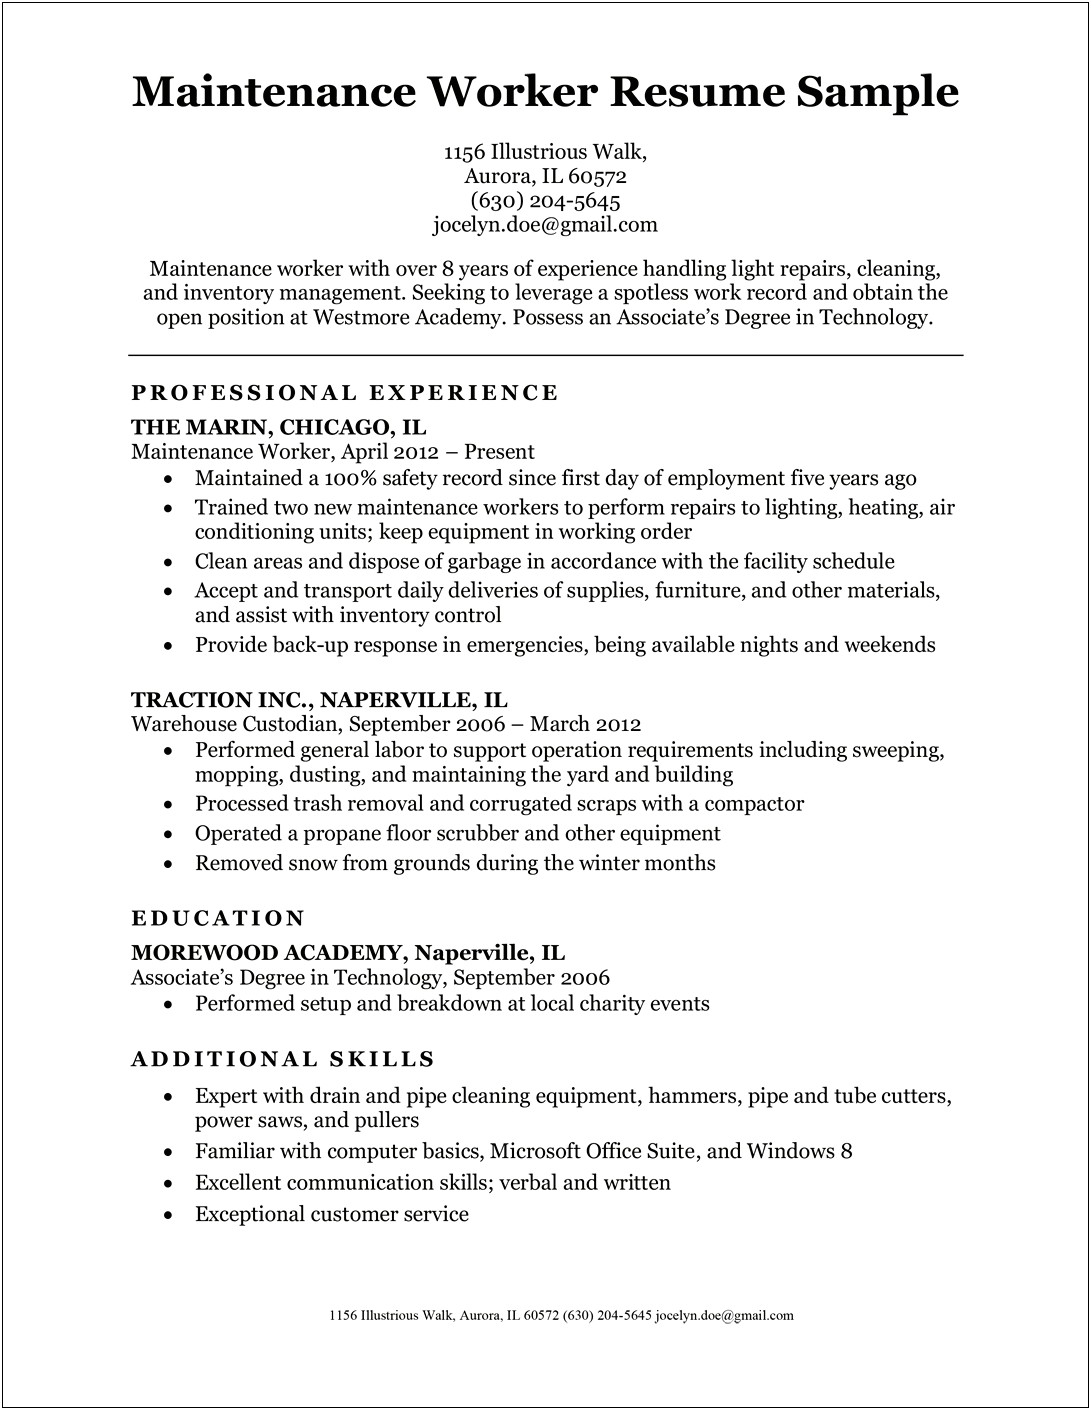 Degrees From Different Schools On Resume